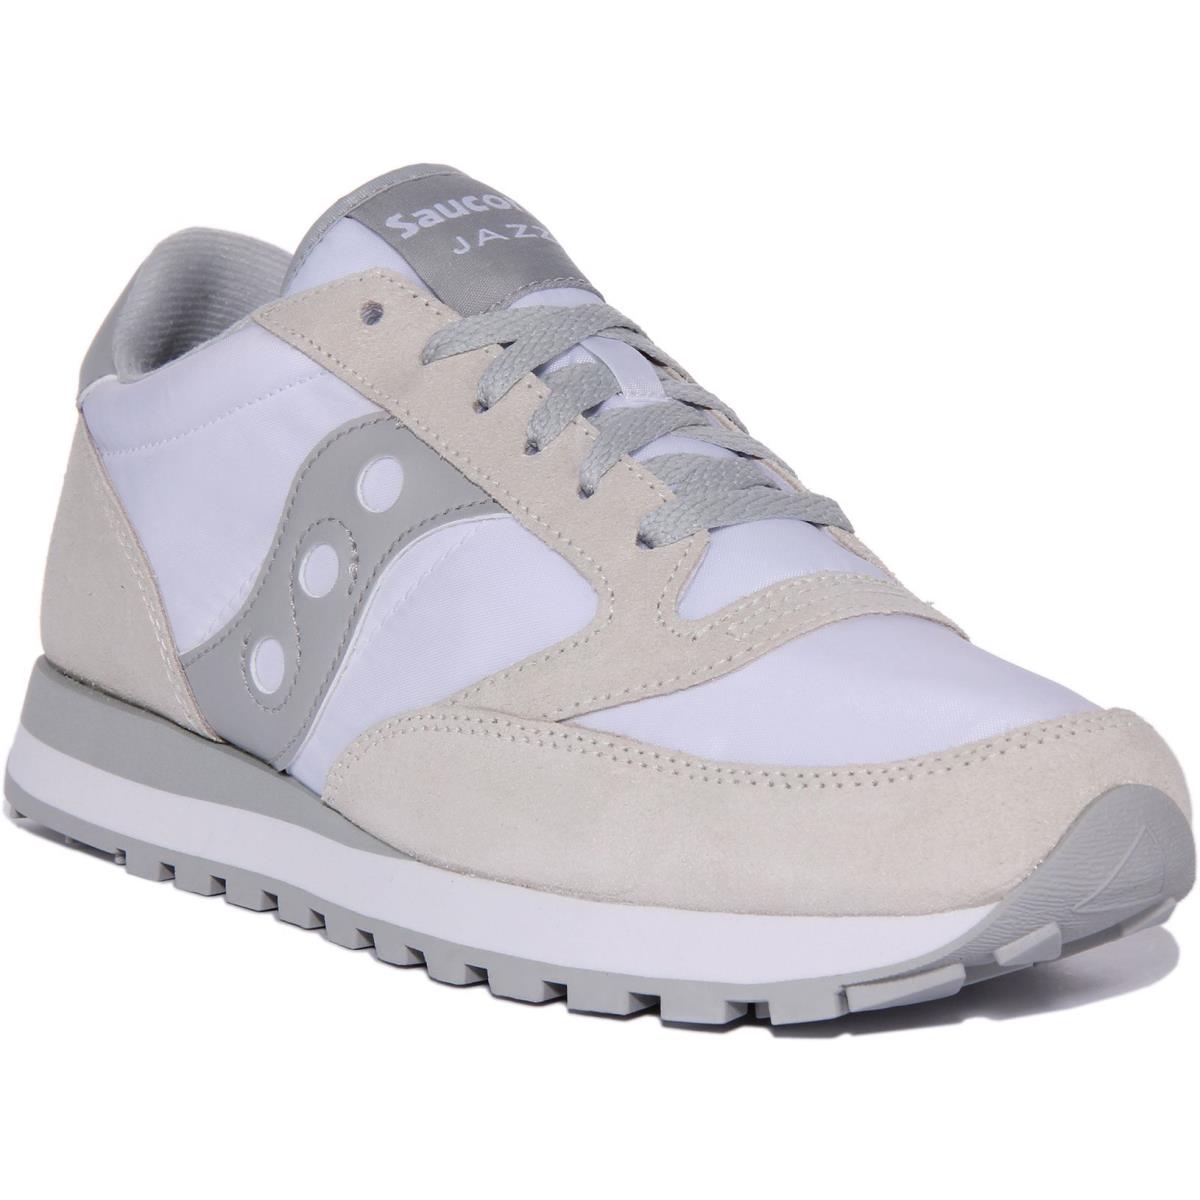 Saucony Jazz Men Lace Up 80s Retro Sneaker In White Grey Size US 7 - 13 WHITE GREY